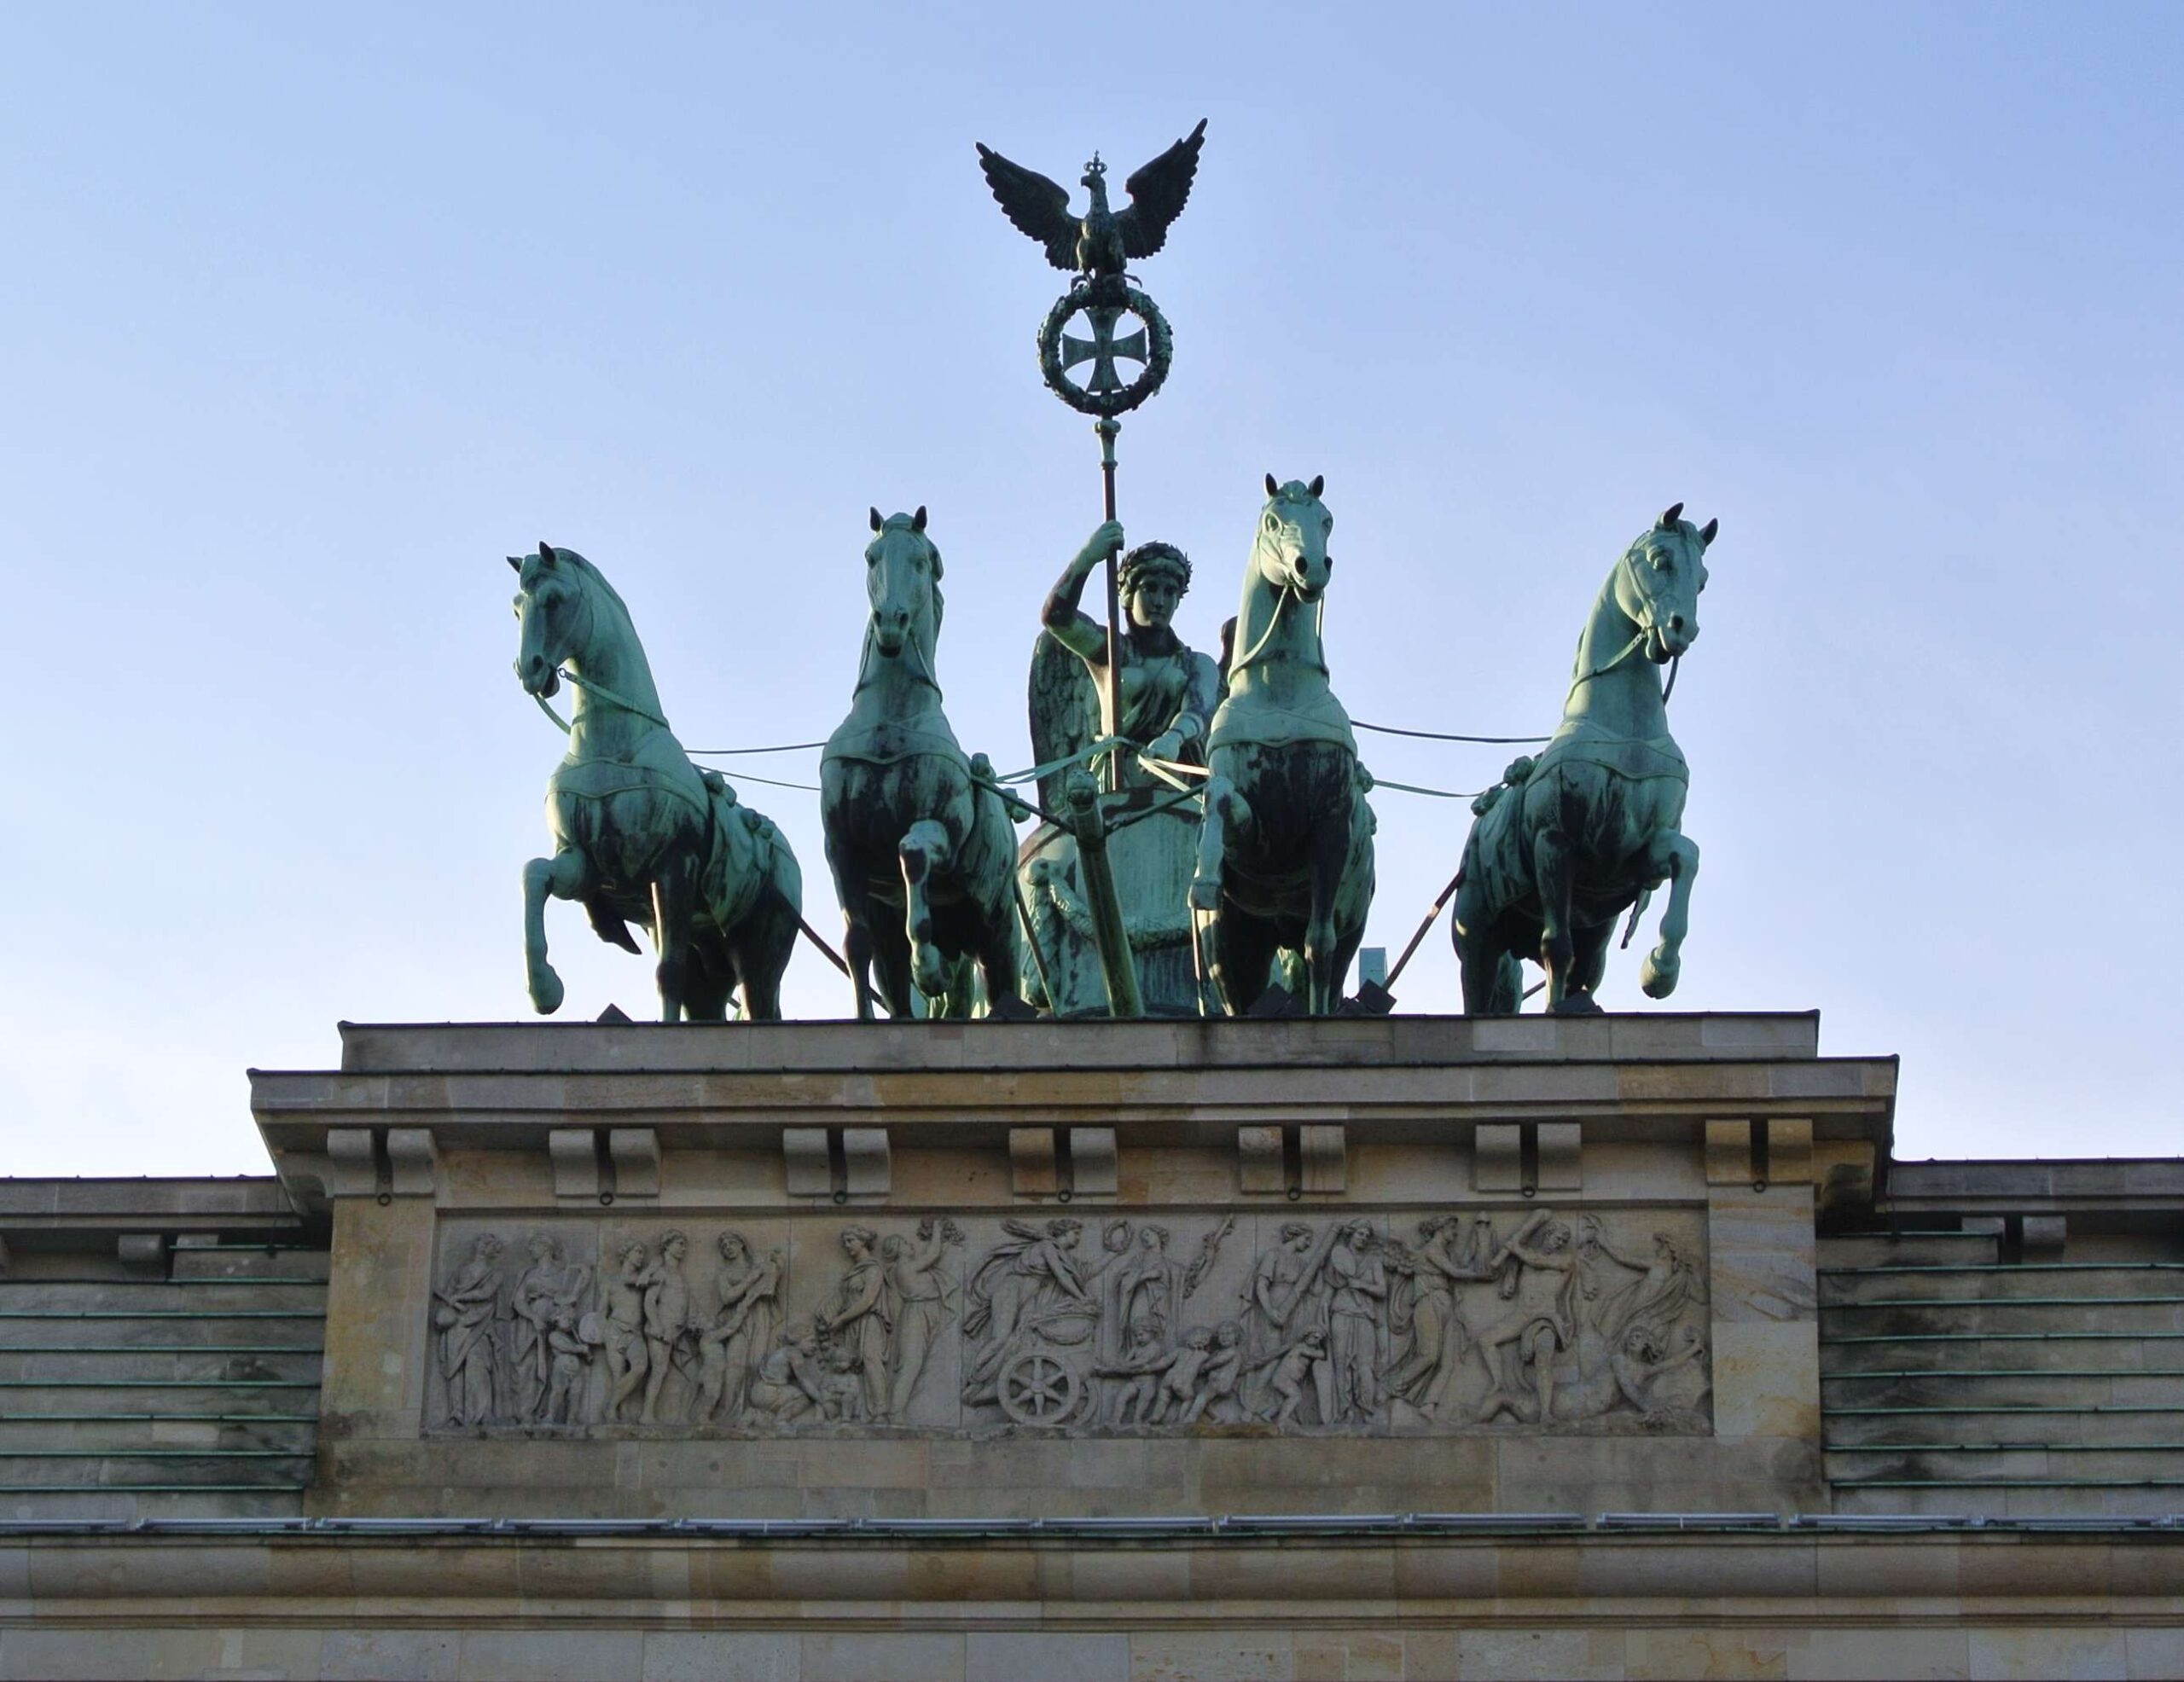 Brandenburger Tor a monument that depicts a woman leading a chariot drawn by four horses